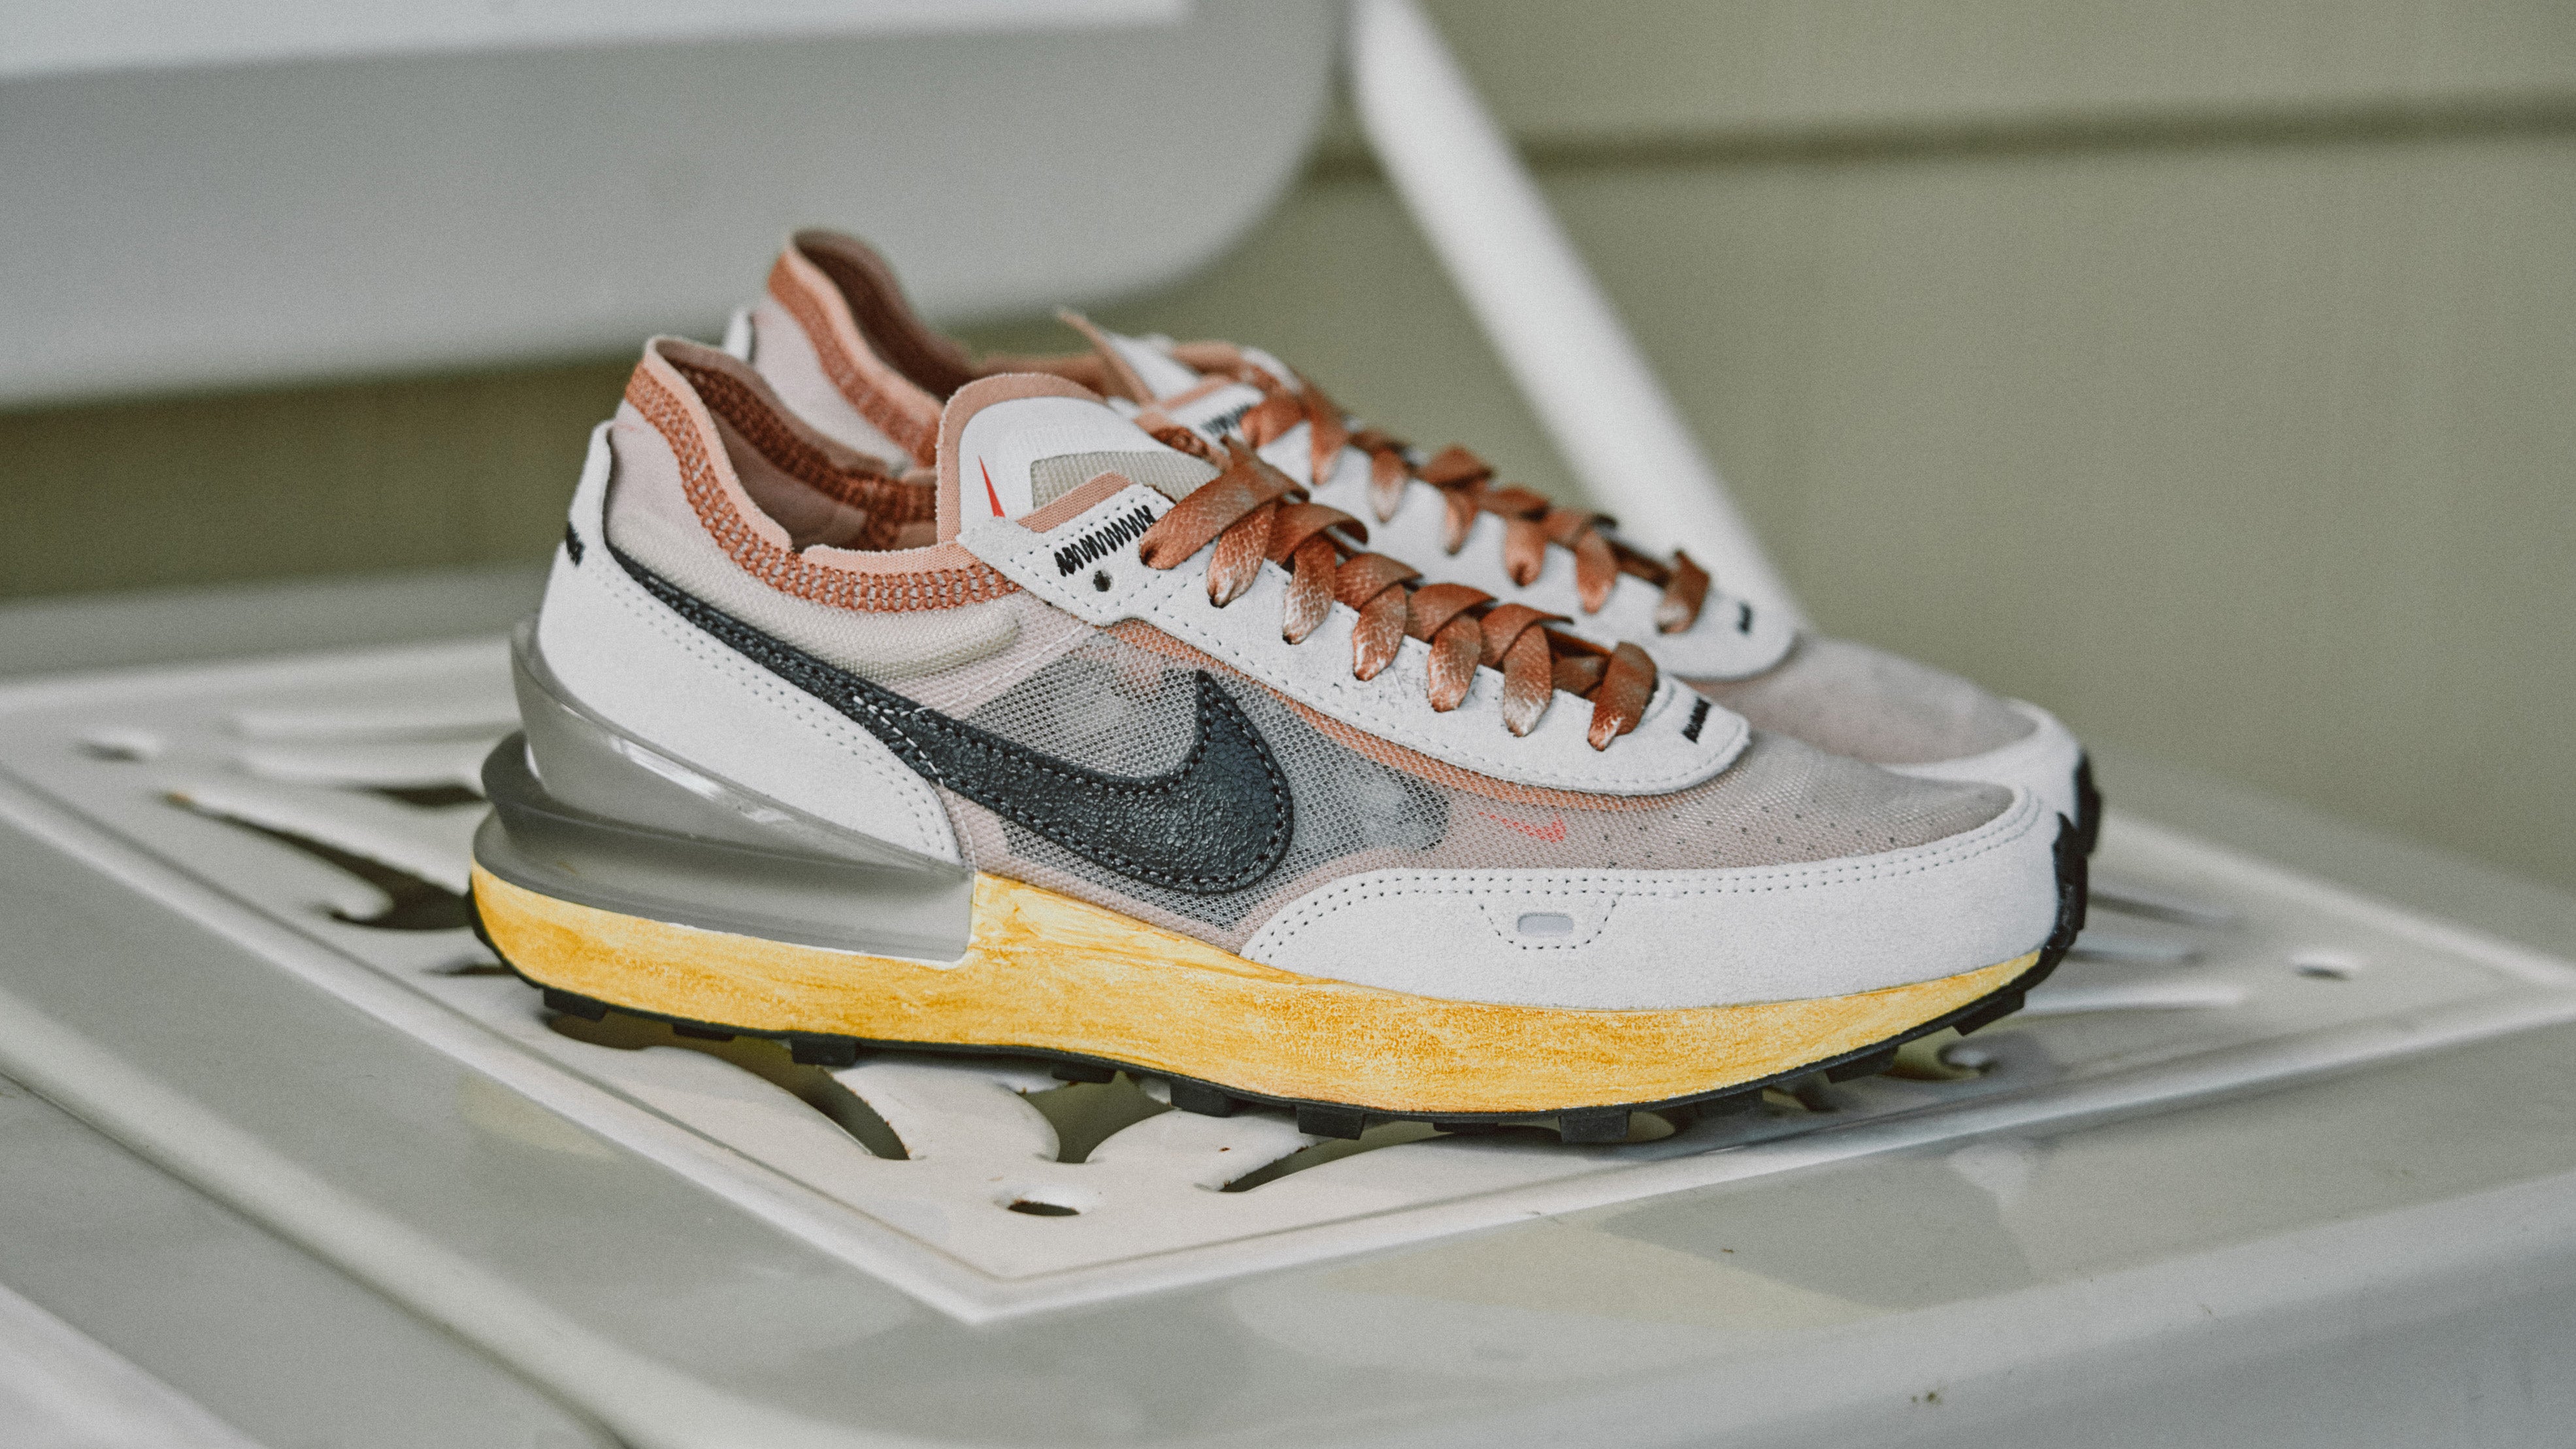 A New Classic Debut: The Nike Waffle One Whitaker Group Exclusive